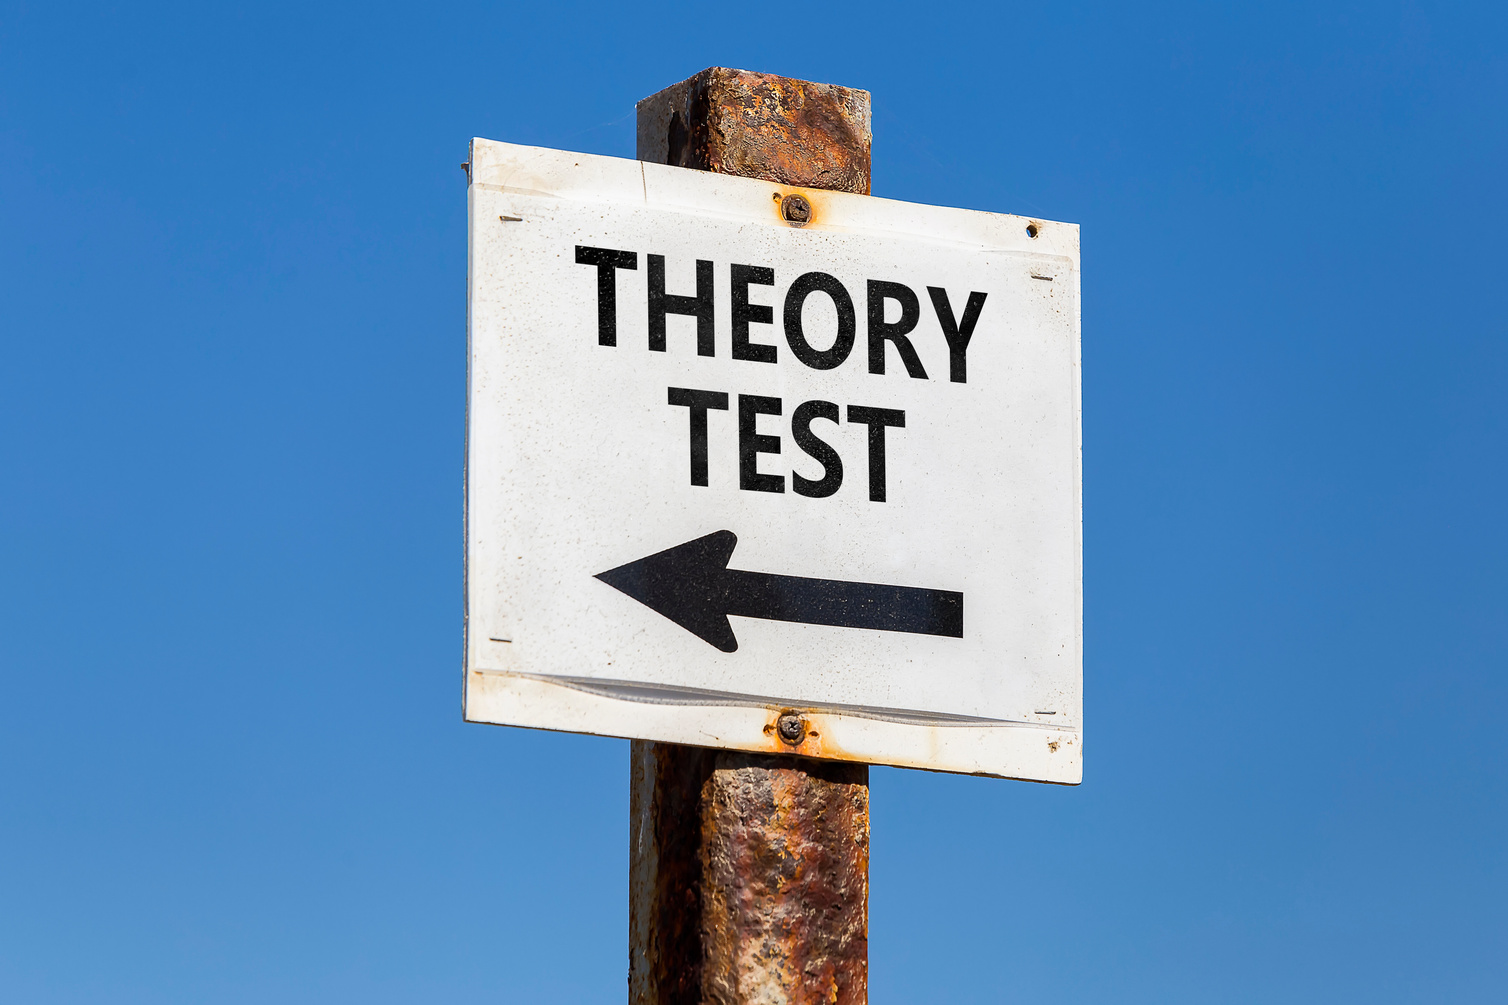 Theory test word and arrow signpost